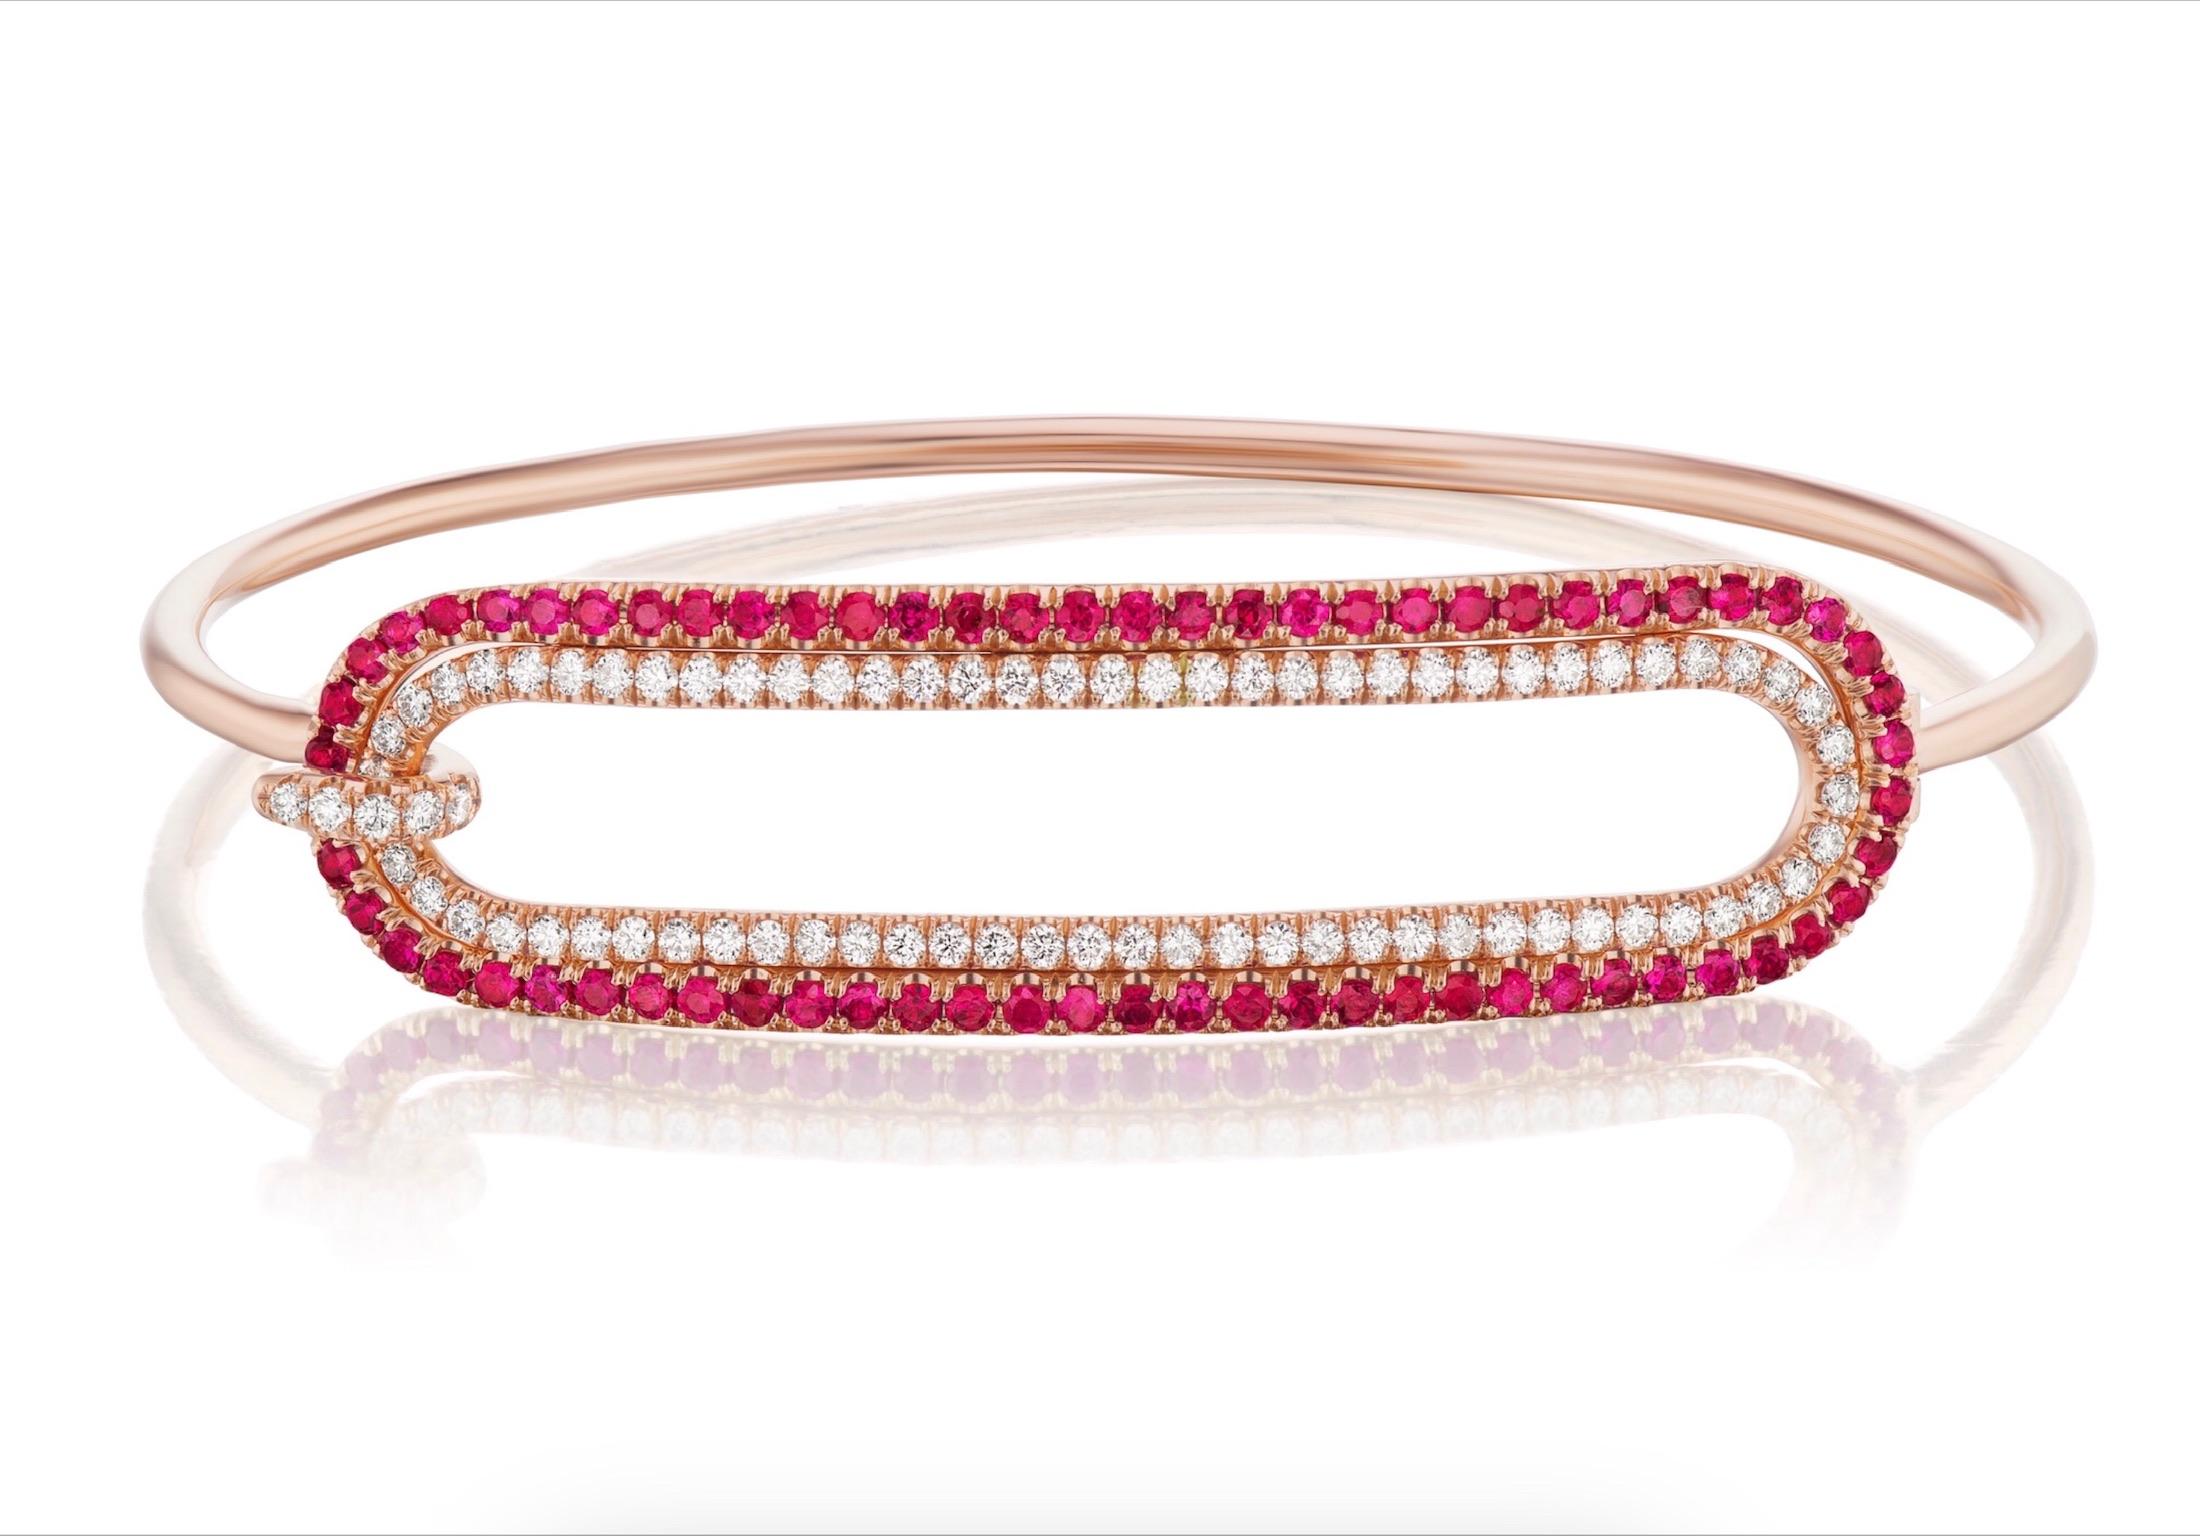 Andrew Glassford's 2mm Tension Bracelet in 18K rose gold with 1.20 carats of rubies and .73 carats of GH VSI Diamonds that creates a stunning 